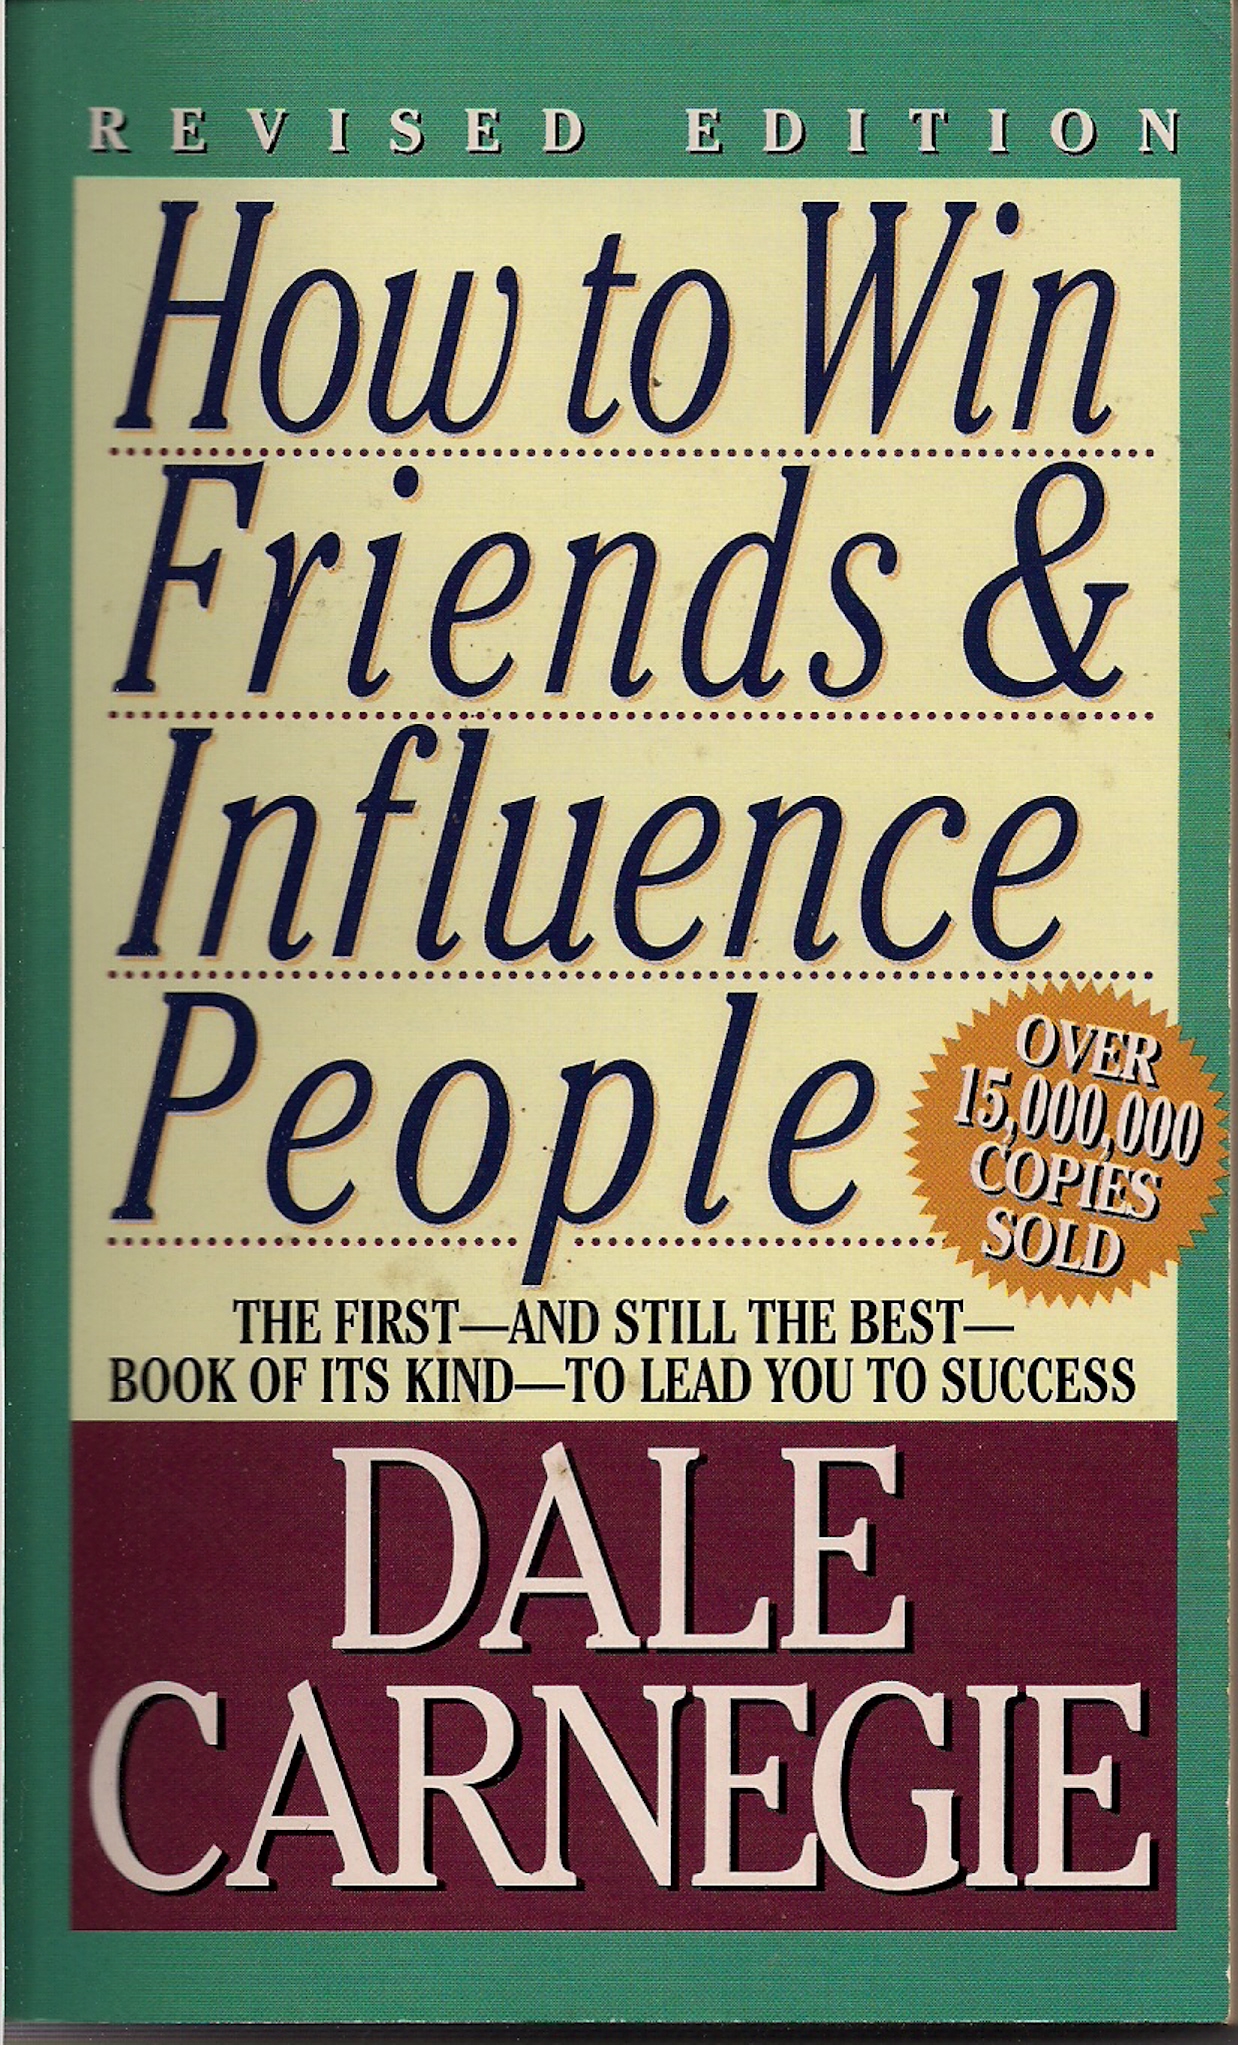 How I Built a Network with Dale Carnegie